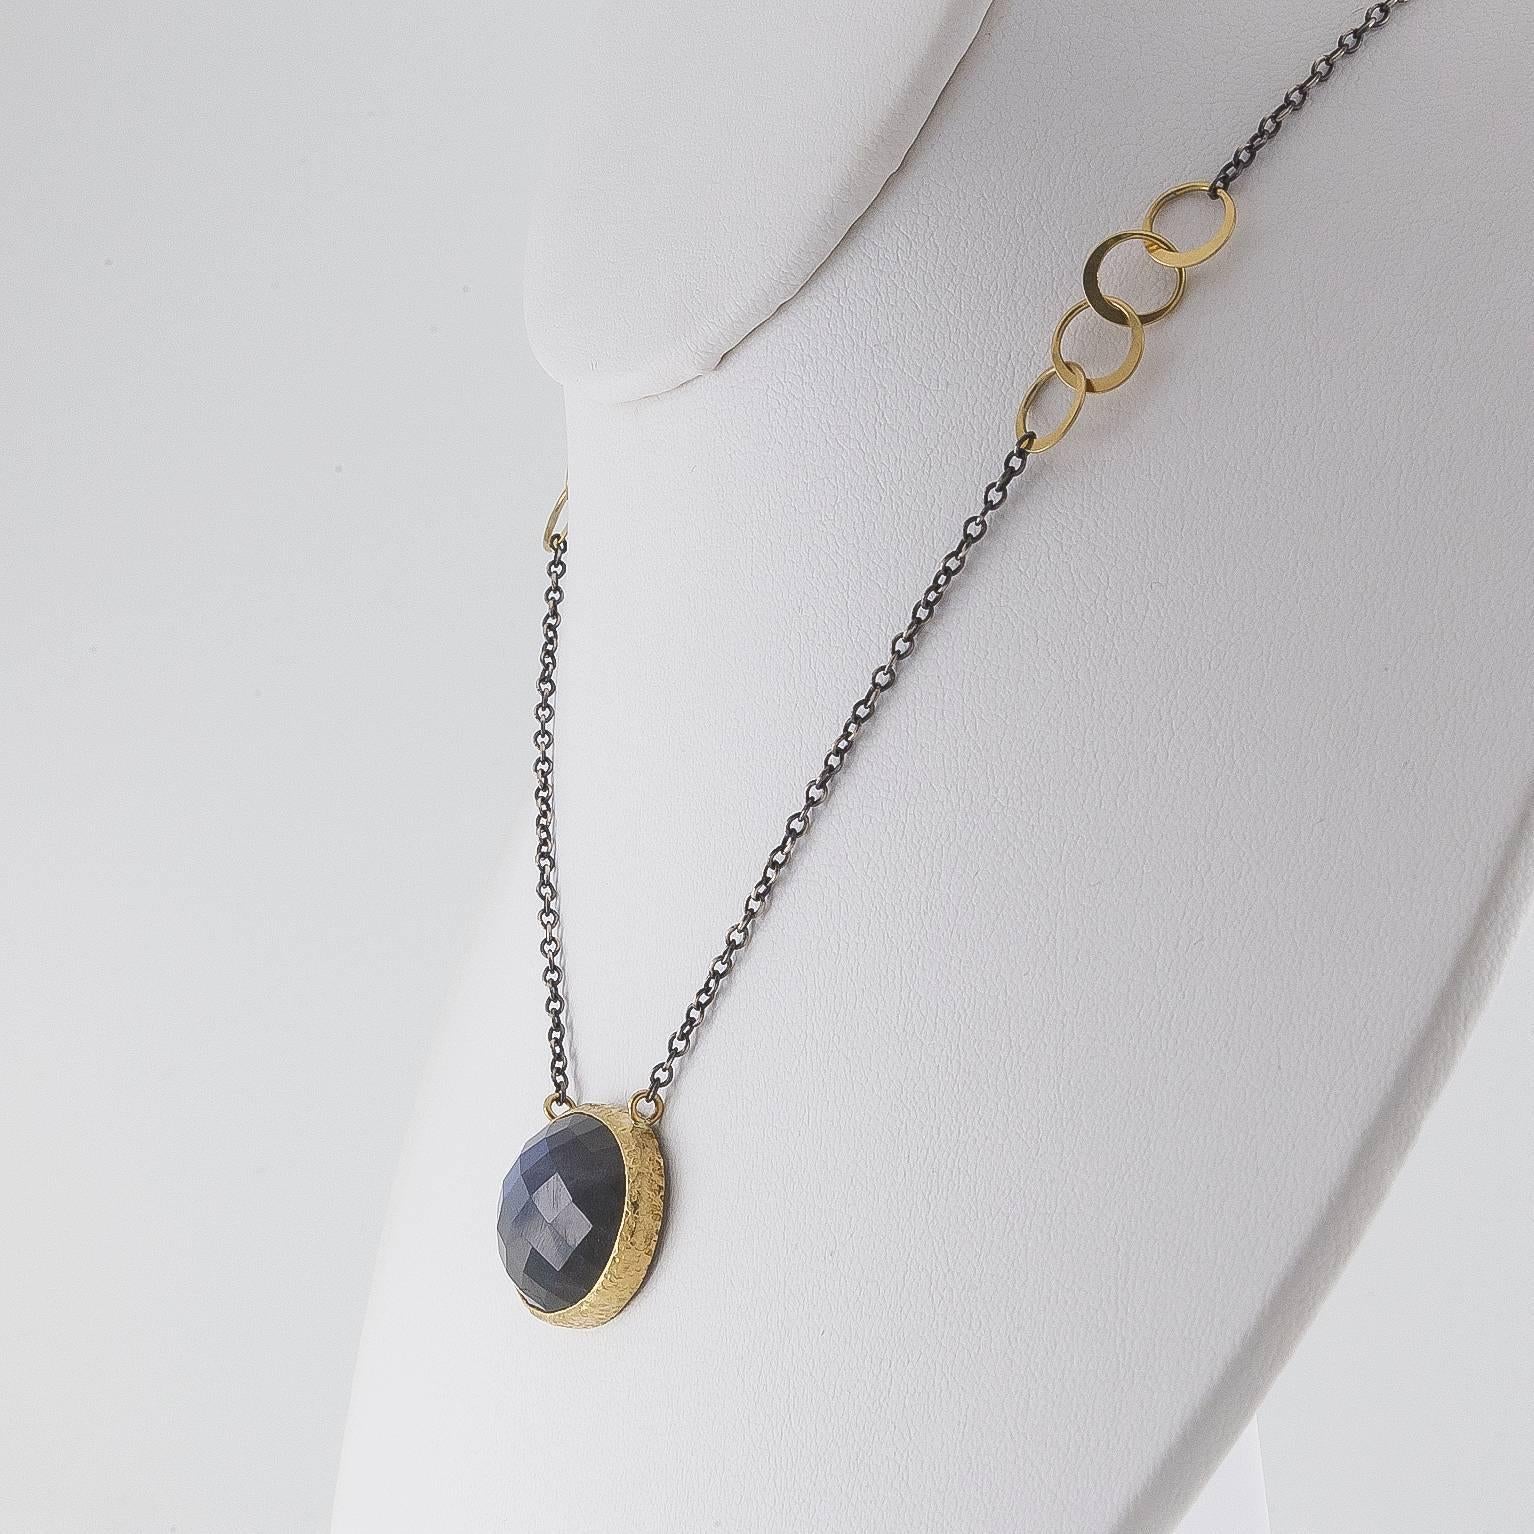 Modern Mixed Metal Rose Cut Labradorite Oxidized Sterling Gold Necklace For Sale